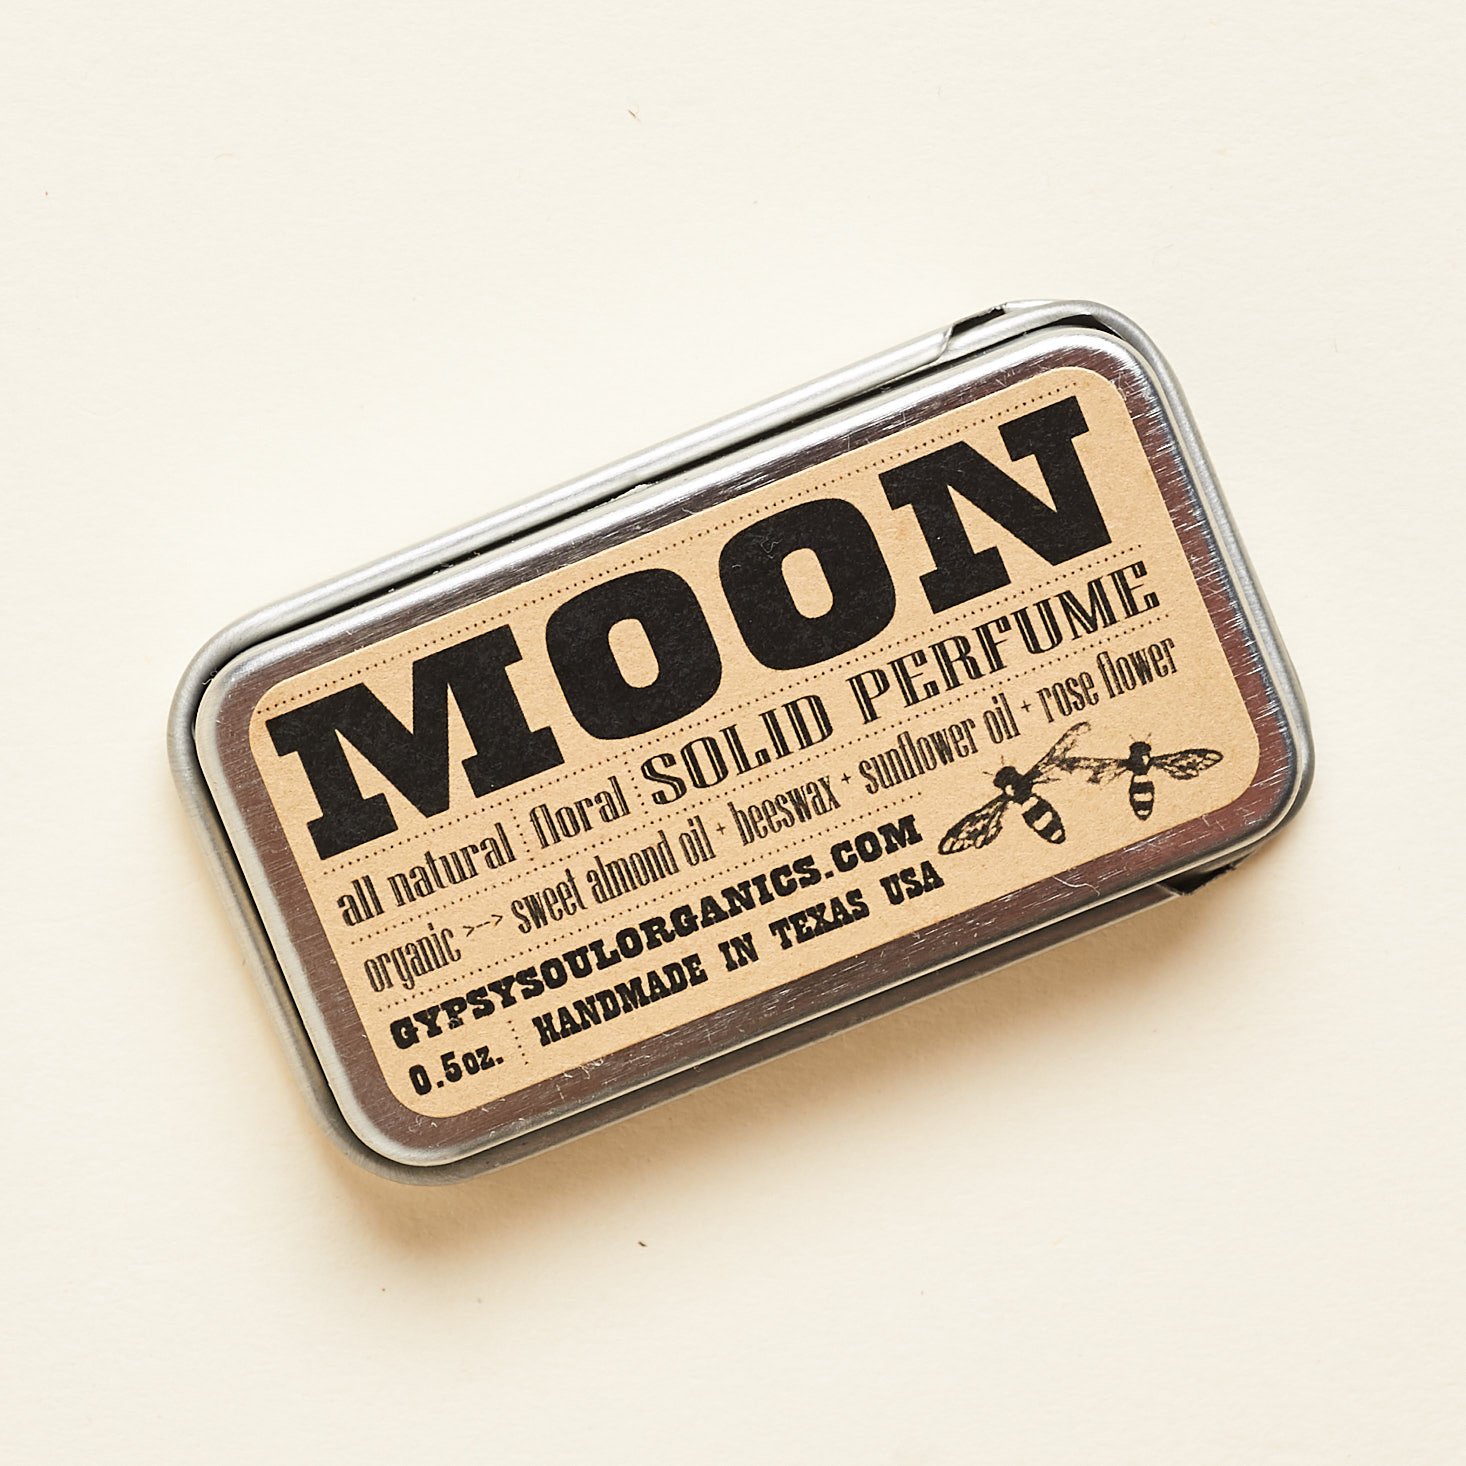 moon solid perfume in metal sliding container